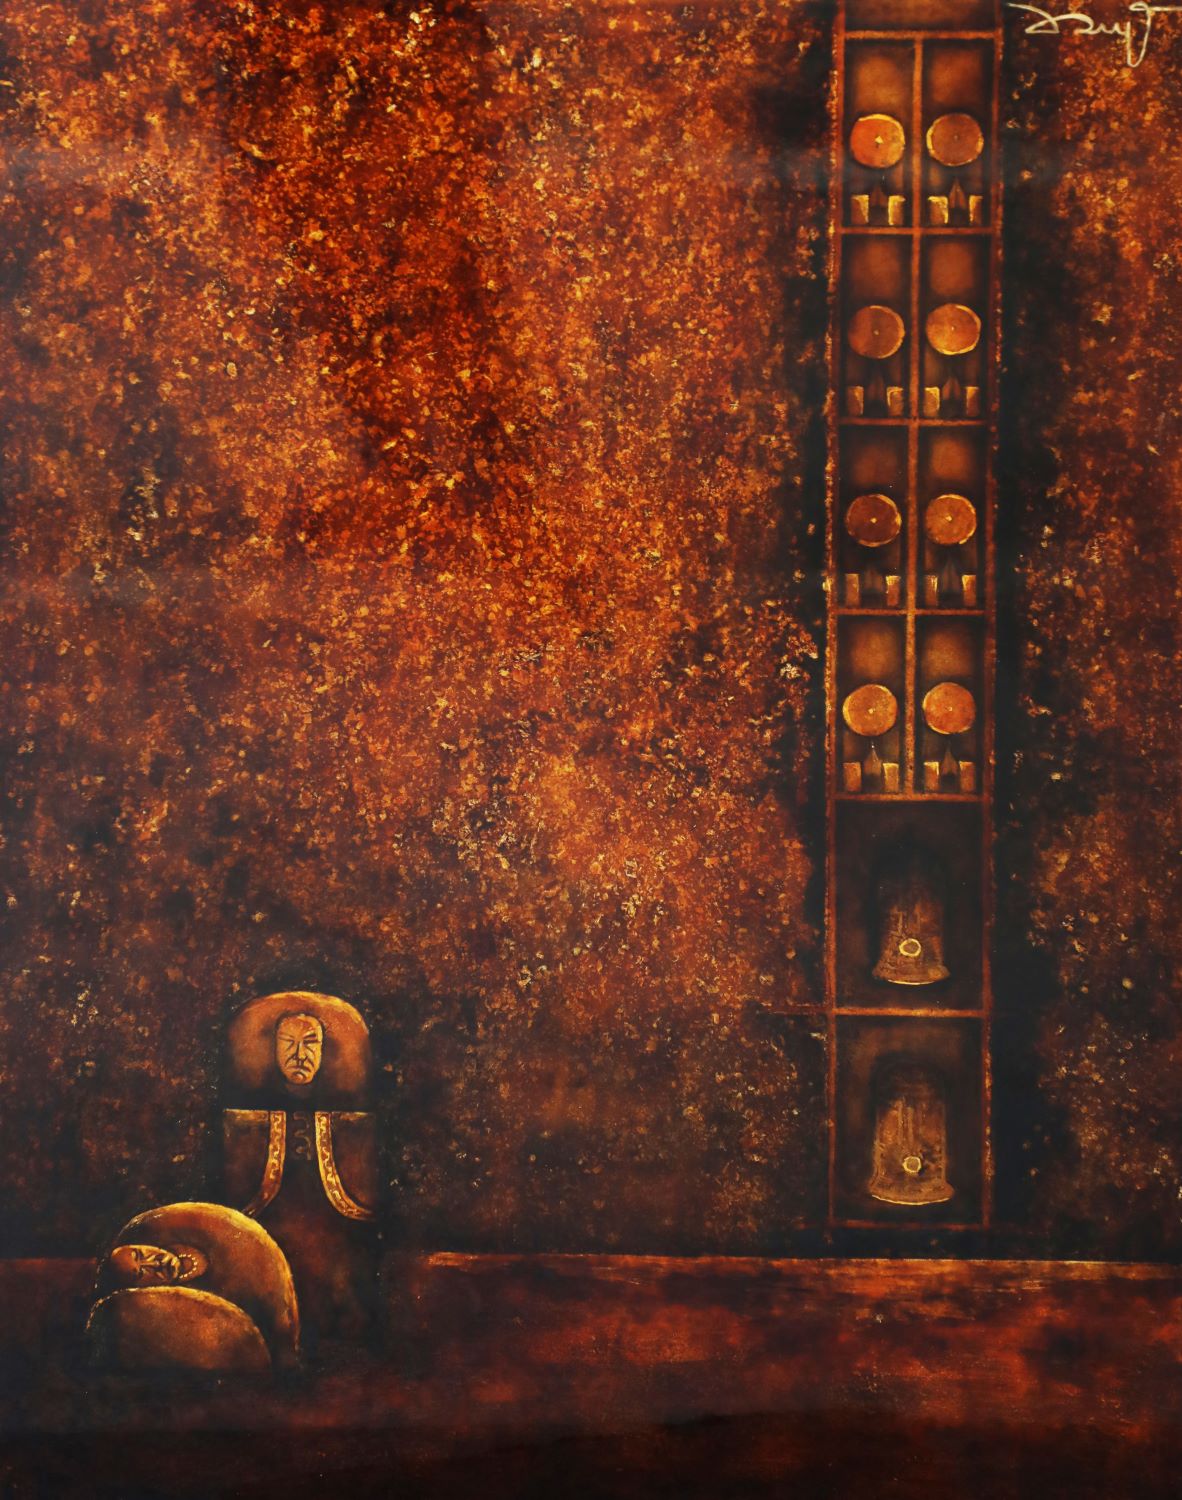 Praying III - Vietnamese Lacquer Painting by Artist Luong Duy